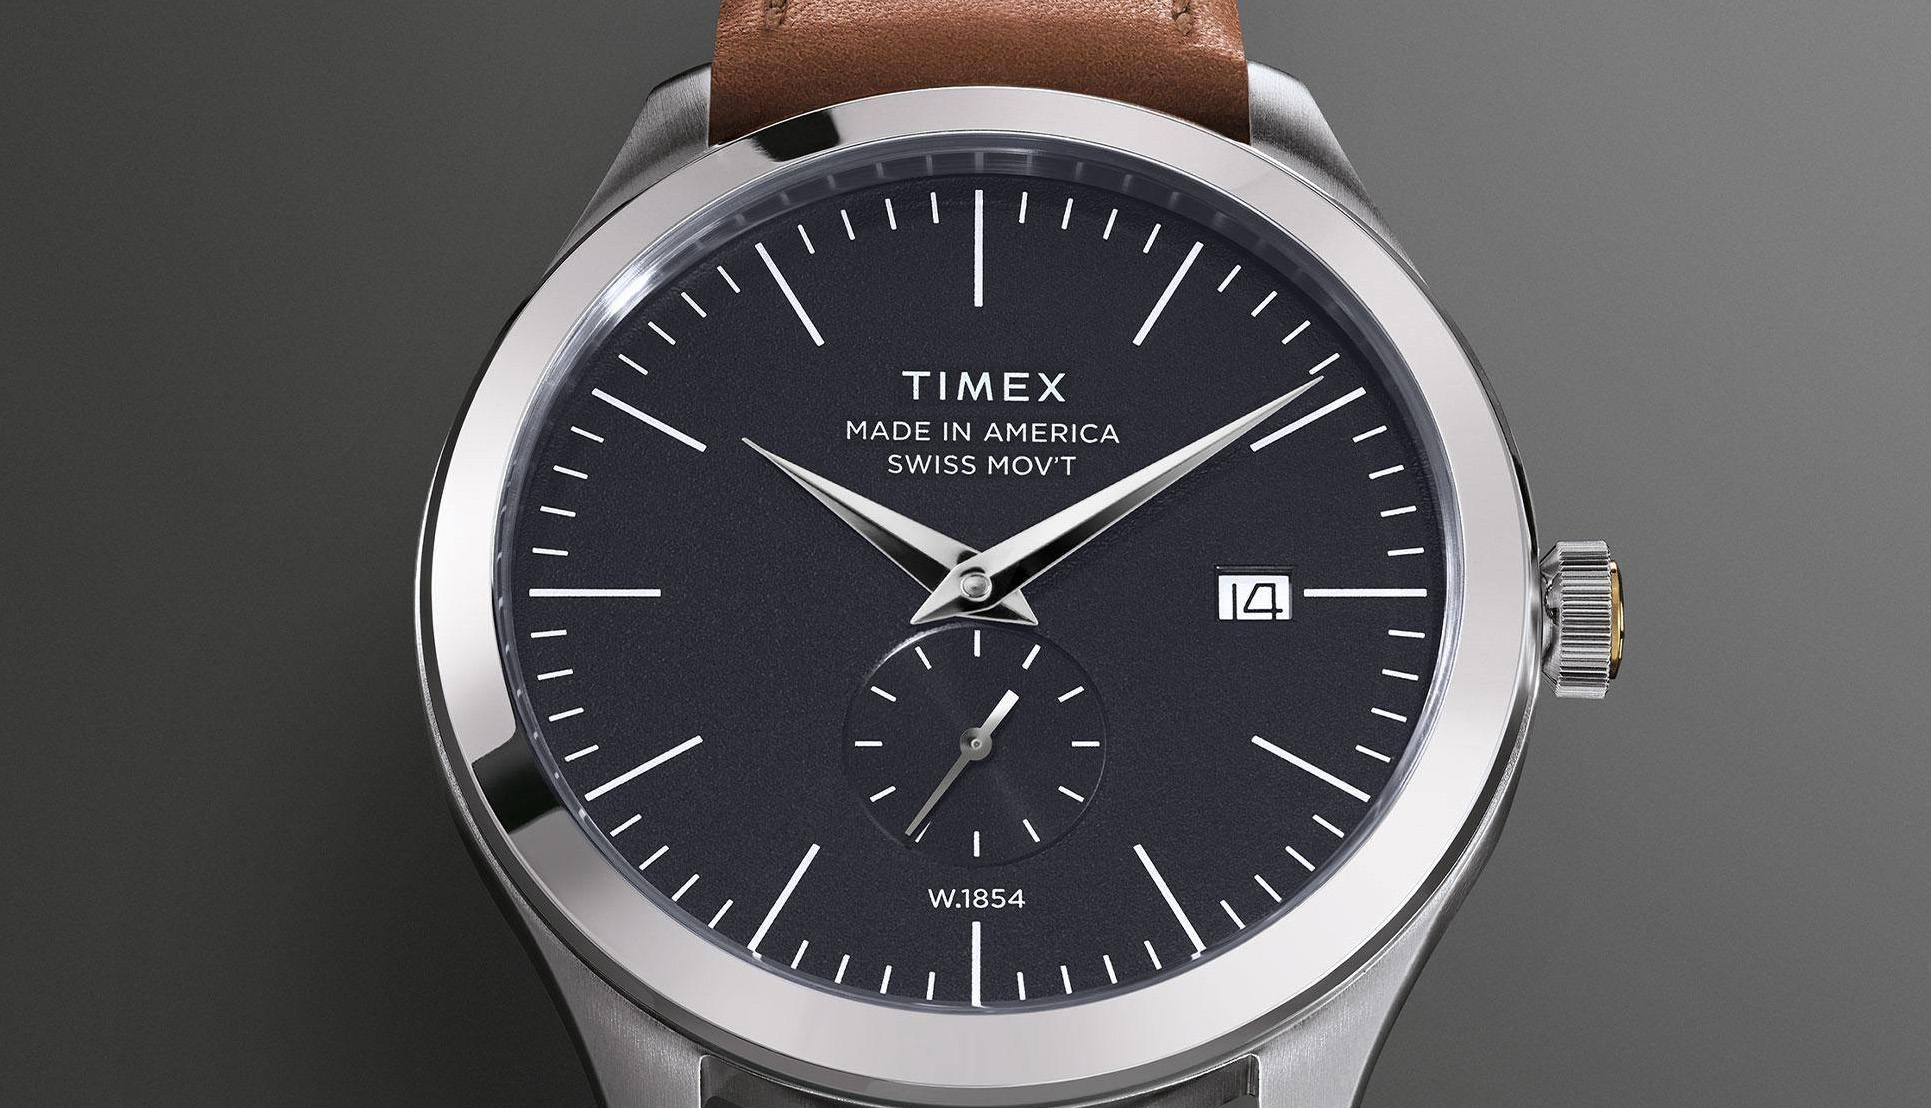 Timex End of Season Sale takes up to 30% off watches, accessories, more  from $30